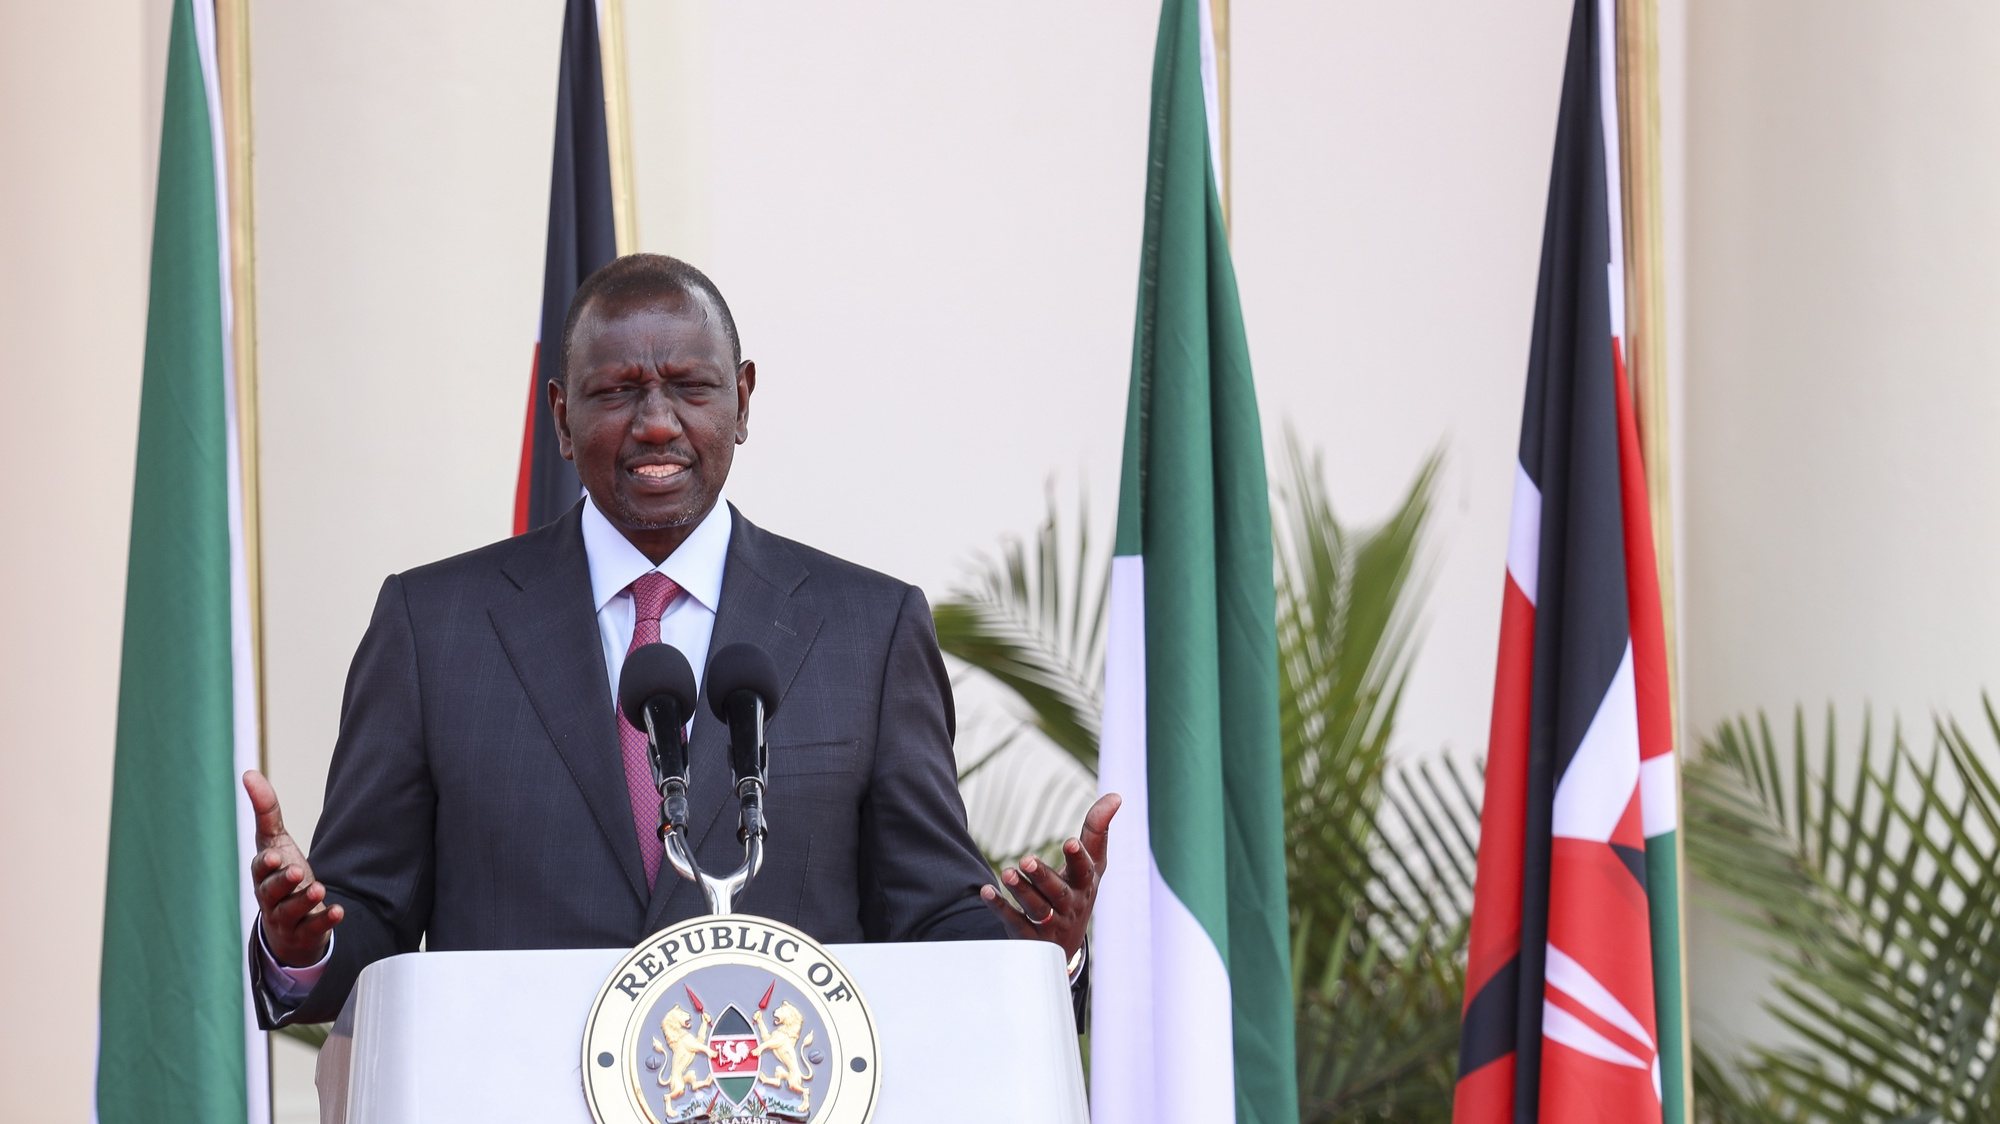 epa10522284 Kenyan President William Ruto addresses the media during a joint press conference with Italy&#039;s President Sergio Mattarella at Statehouse in Nairobi, Kenya, 14 March 2023. Mattarella is in Kenya on an official visit in which he held bilateral talks with Kenyan President Ruto and other state officials to strengthen the diplomatic relations between the two nations.  EPA/DANIEL IRUNGU